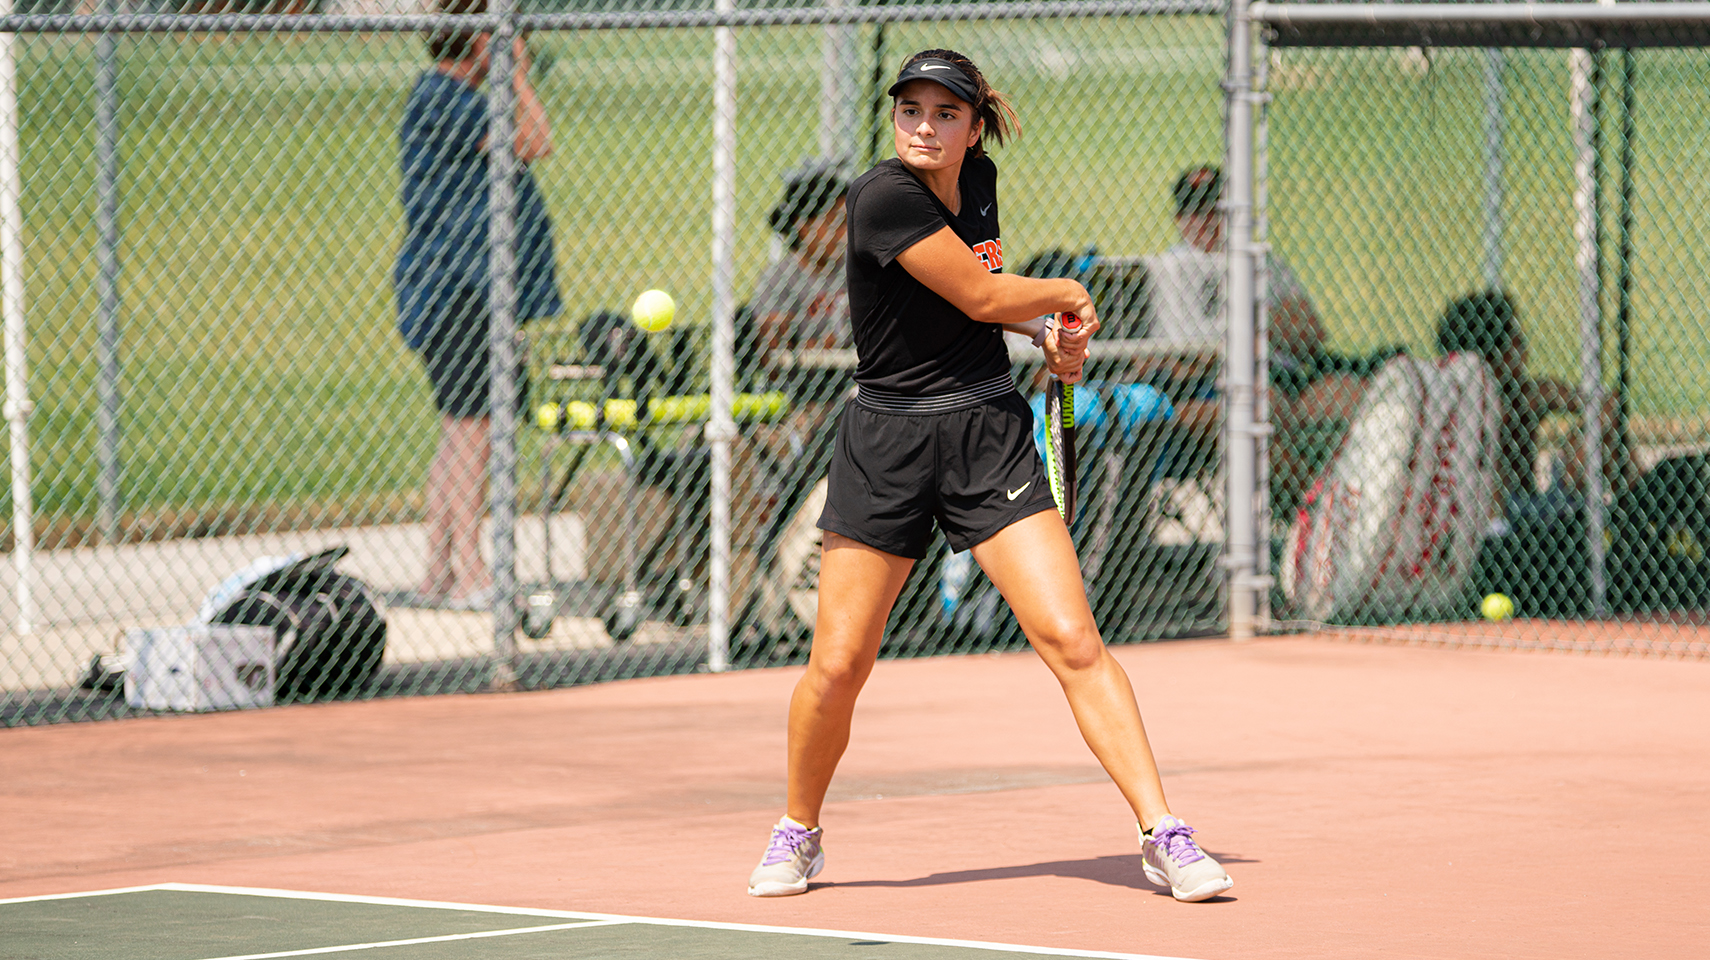 Women's tennis player in black uniform hitting the ball outside on a sunny day